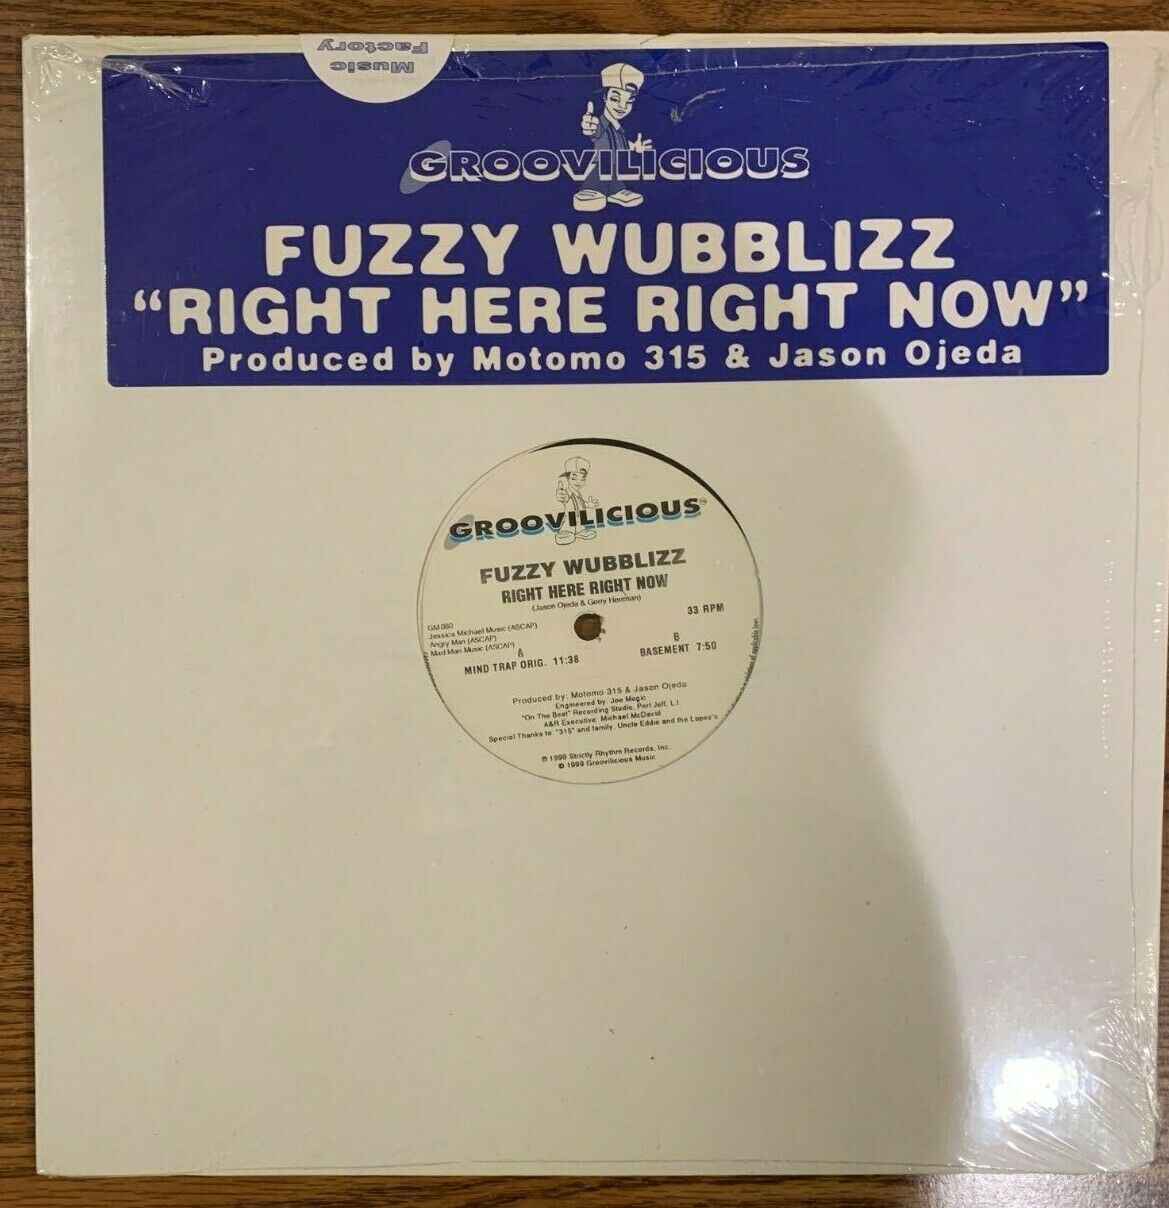 Primary image for Fuzzy Wubblizz Right Here Right Now Vinyl LP Remixes Mind Trap & Jason OJeda